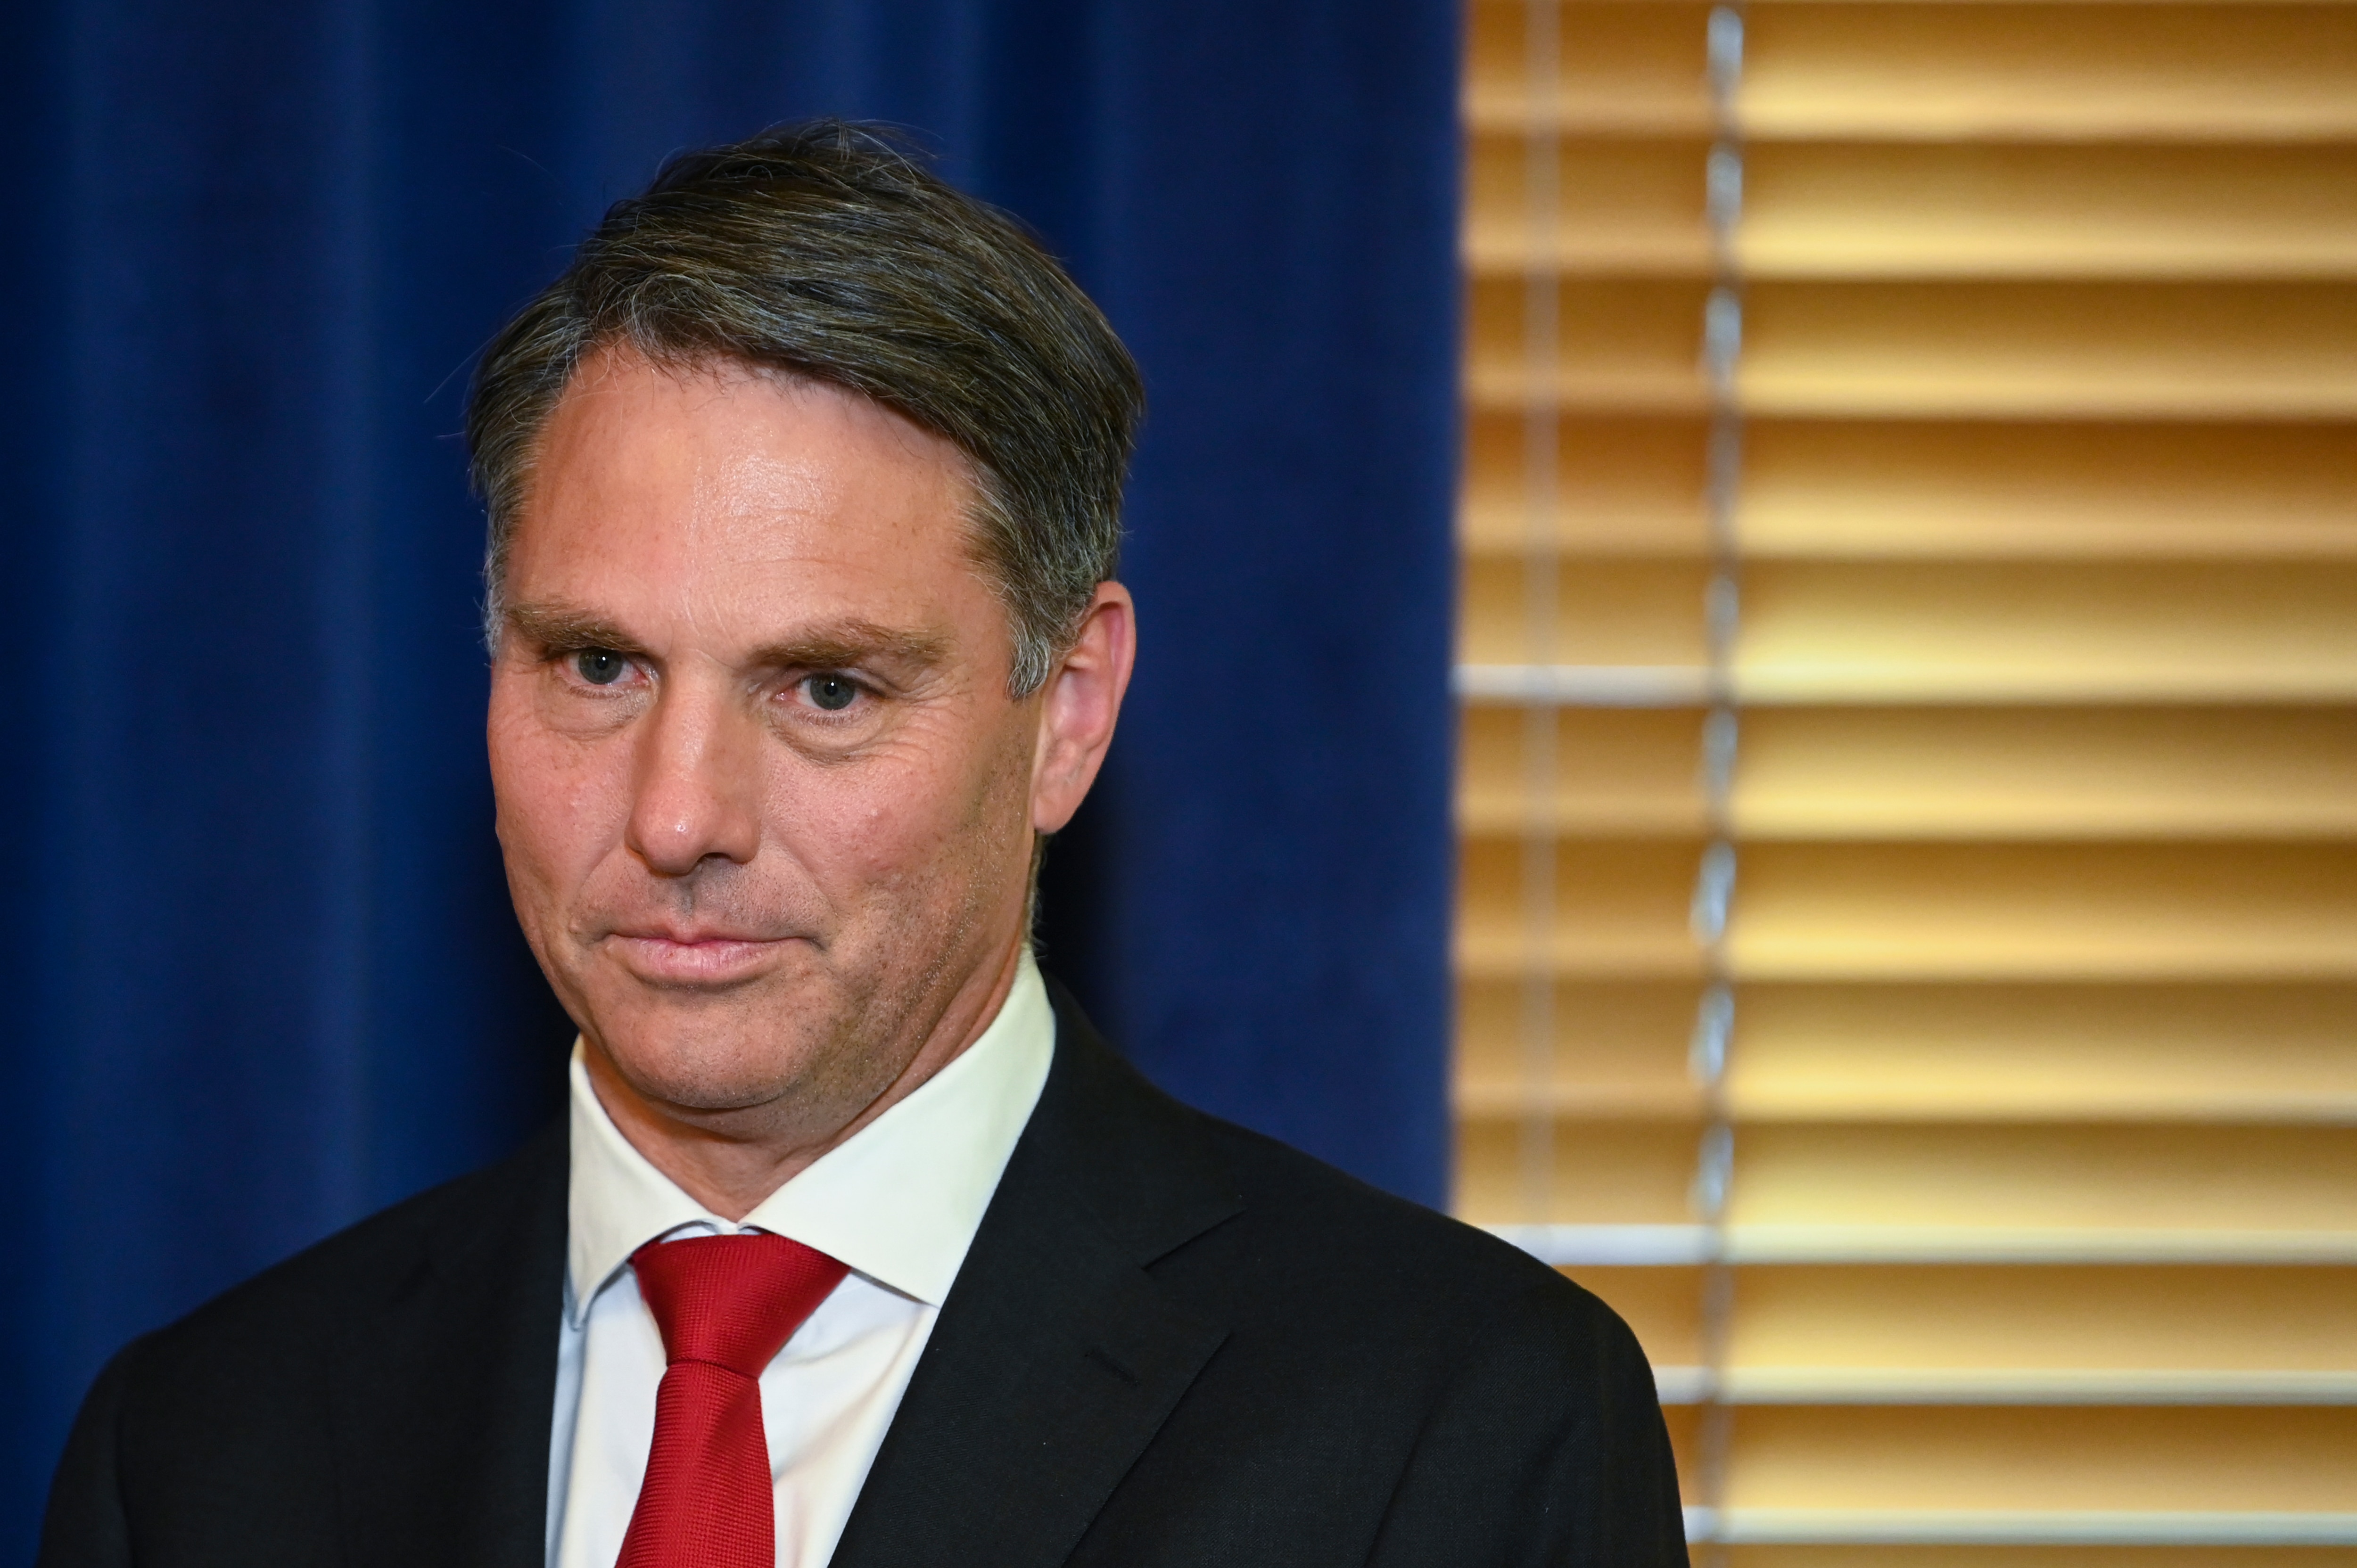 Deputy Opposition Leader Richard Marles has accused the prime minister of engaging in "megaphone diplomacy" during his visit to the US.